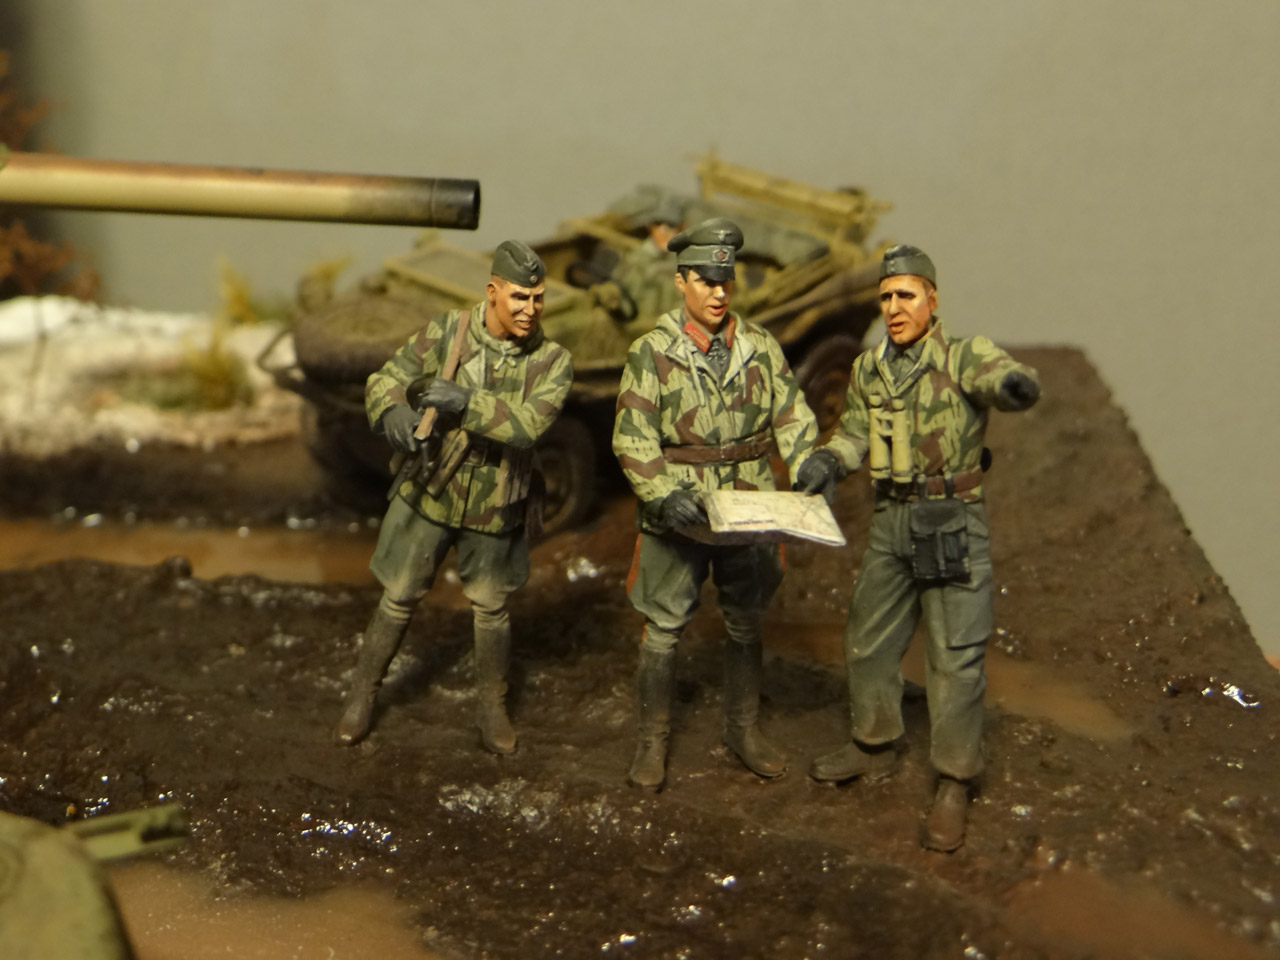 Dioramas and Vignettes: The Western Front, photo #16